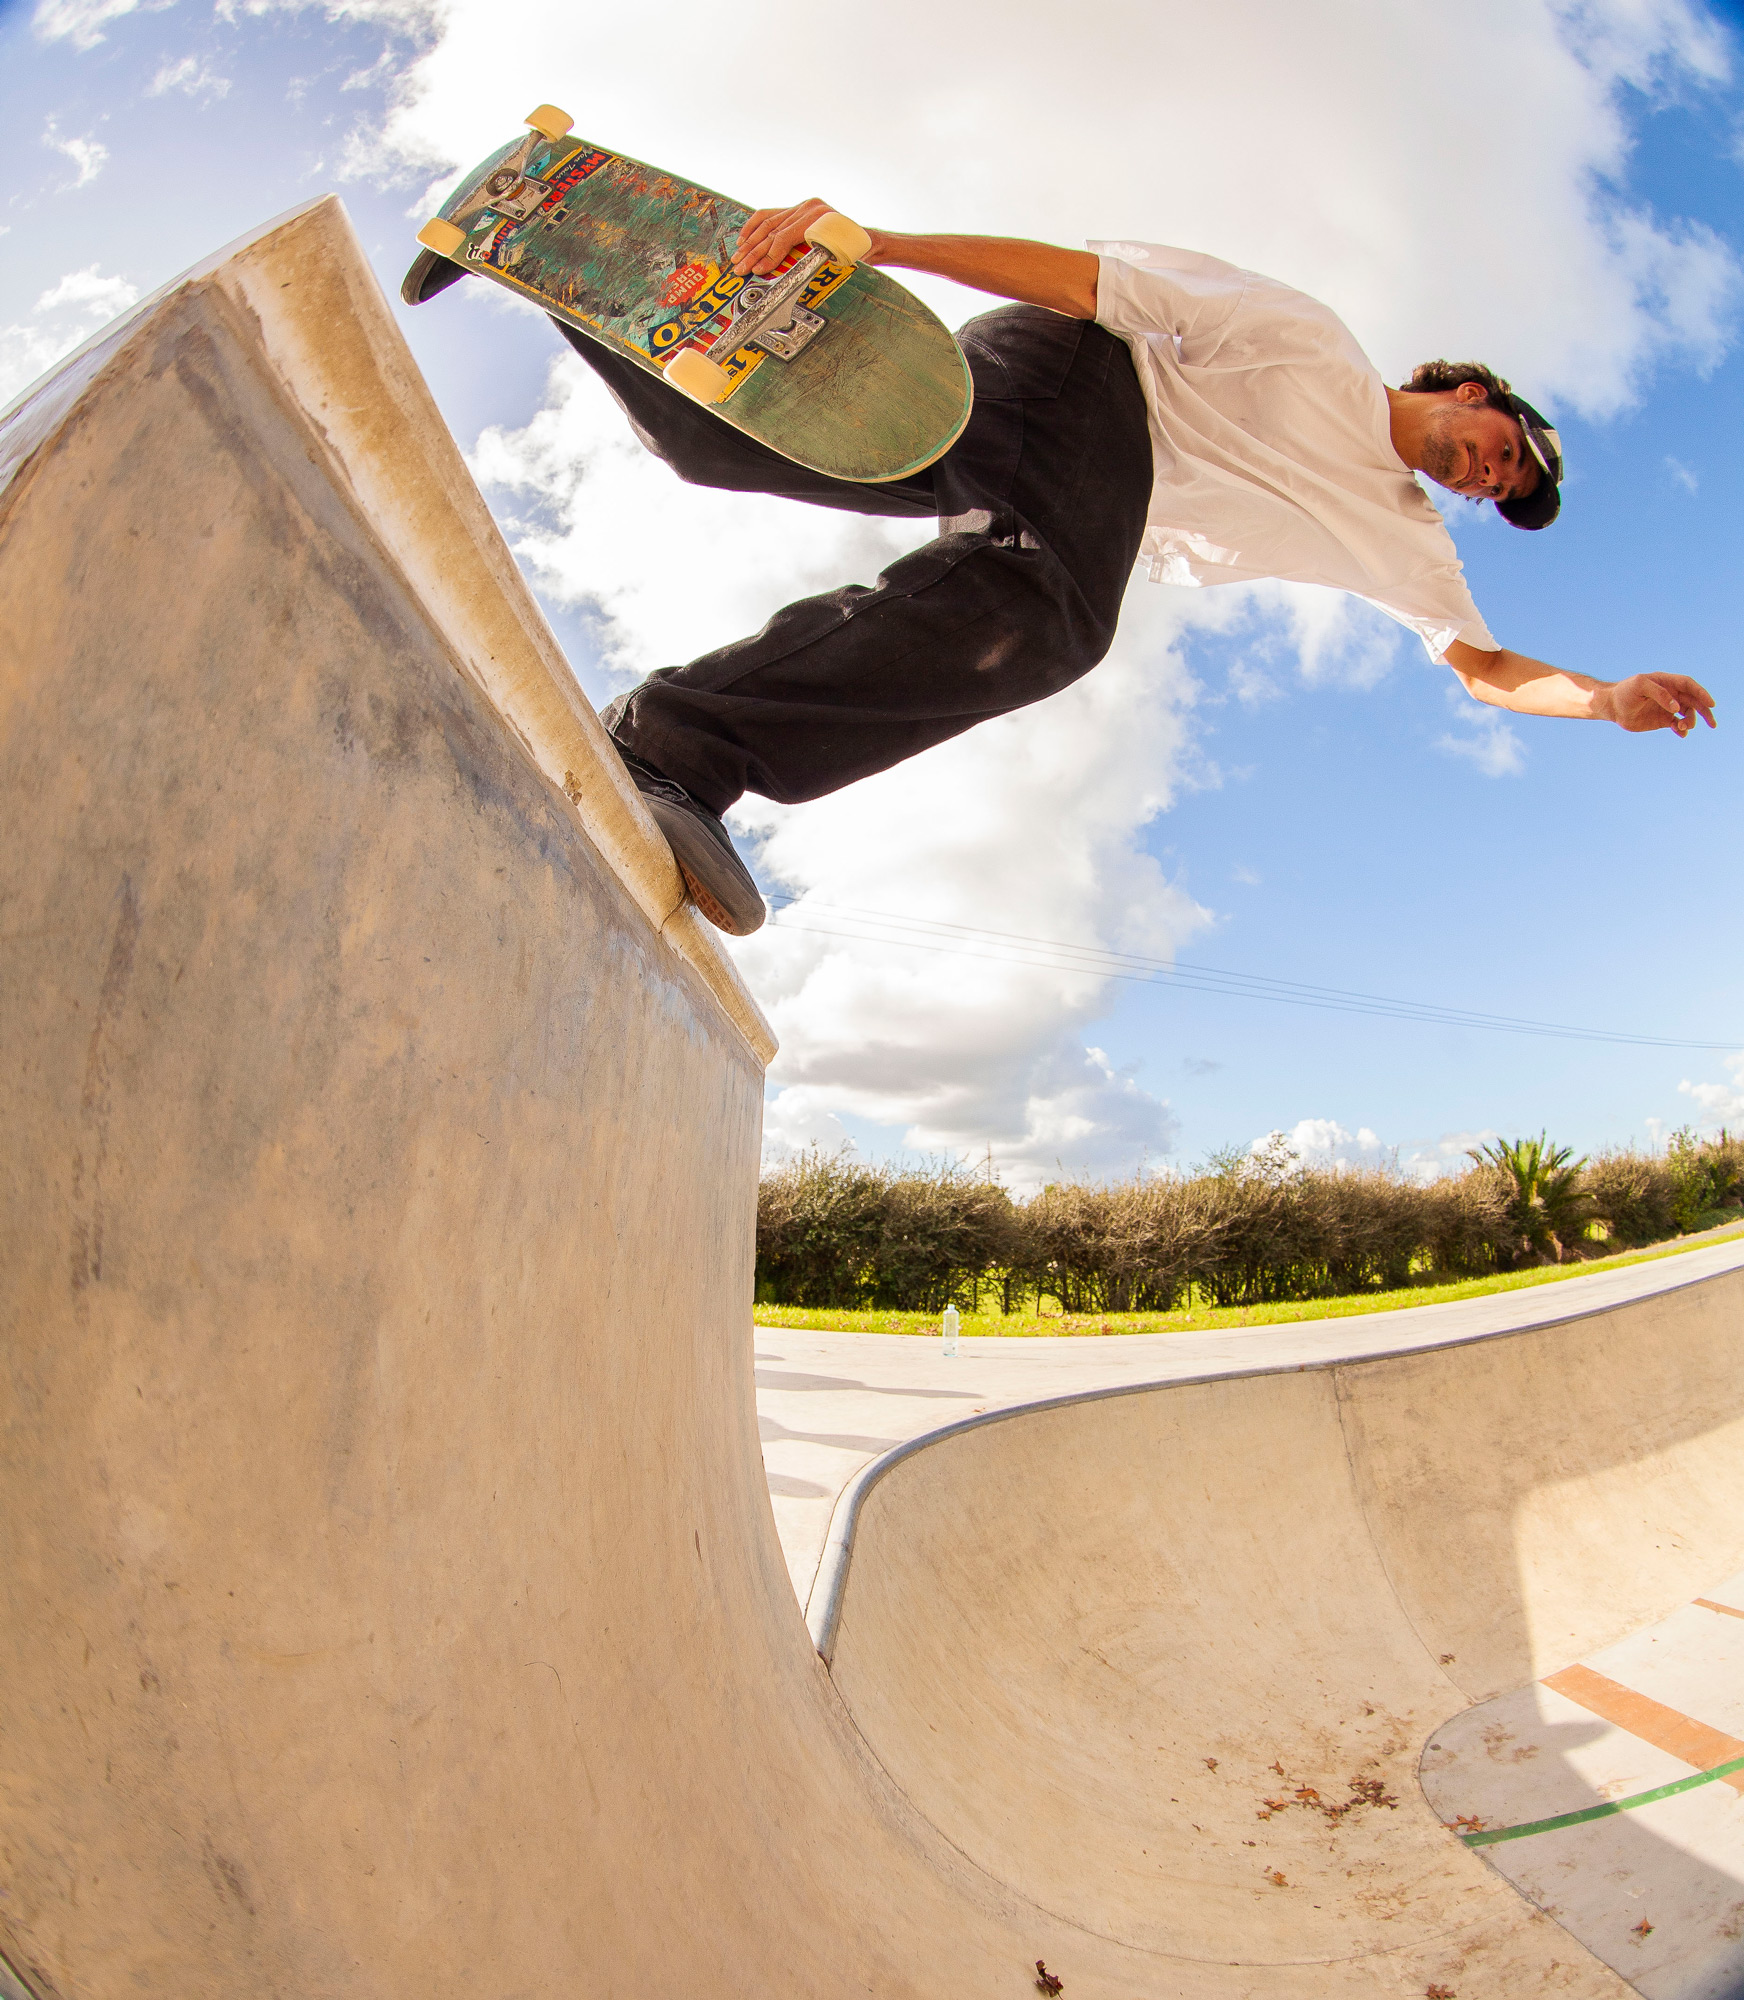 Dereck De Souza performing a backside boneless on the extension of Tuakau bowl in South Auckland. Photo by David Read.